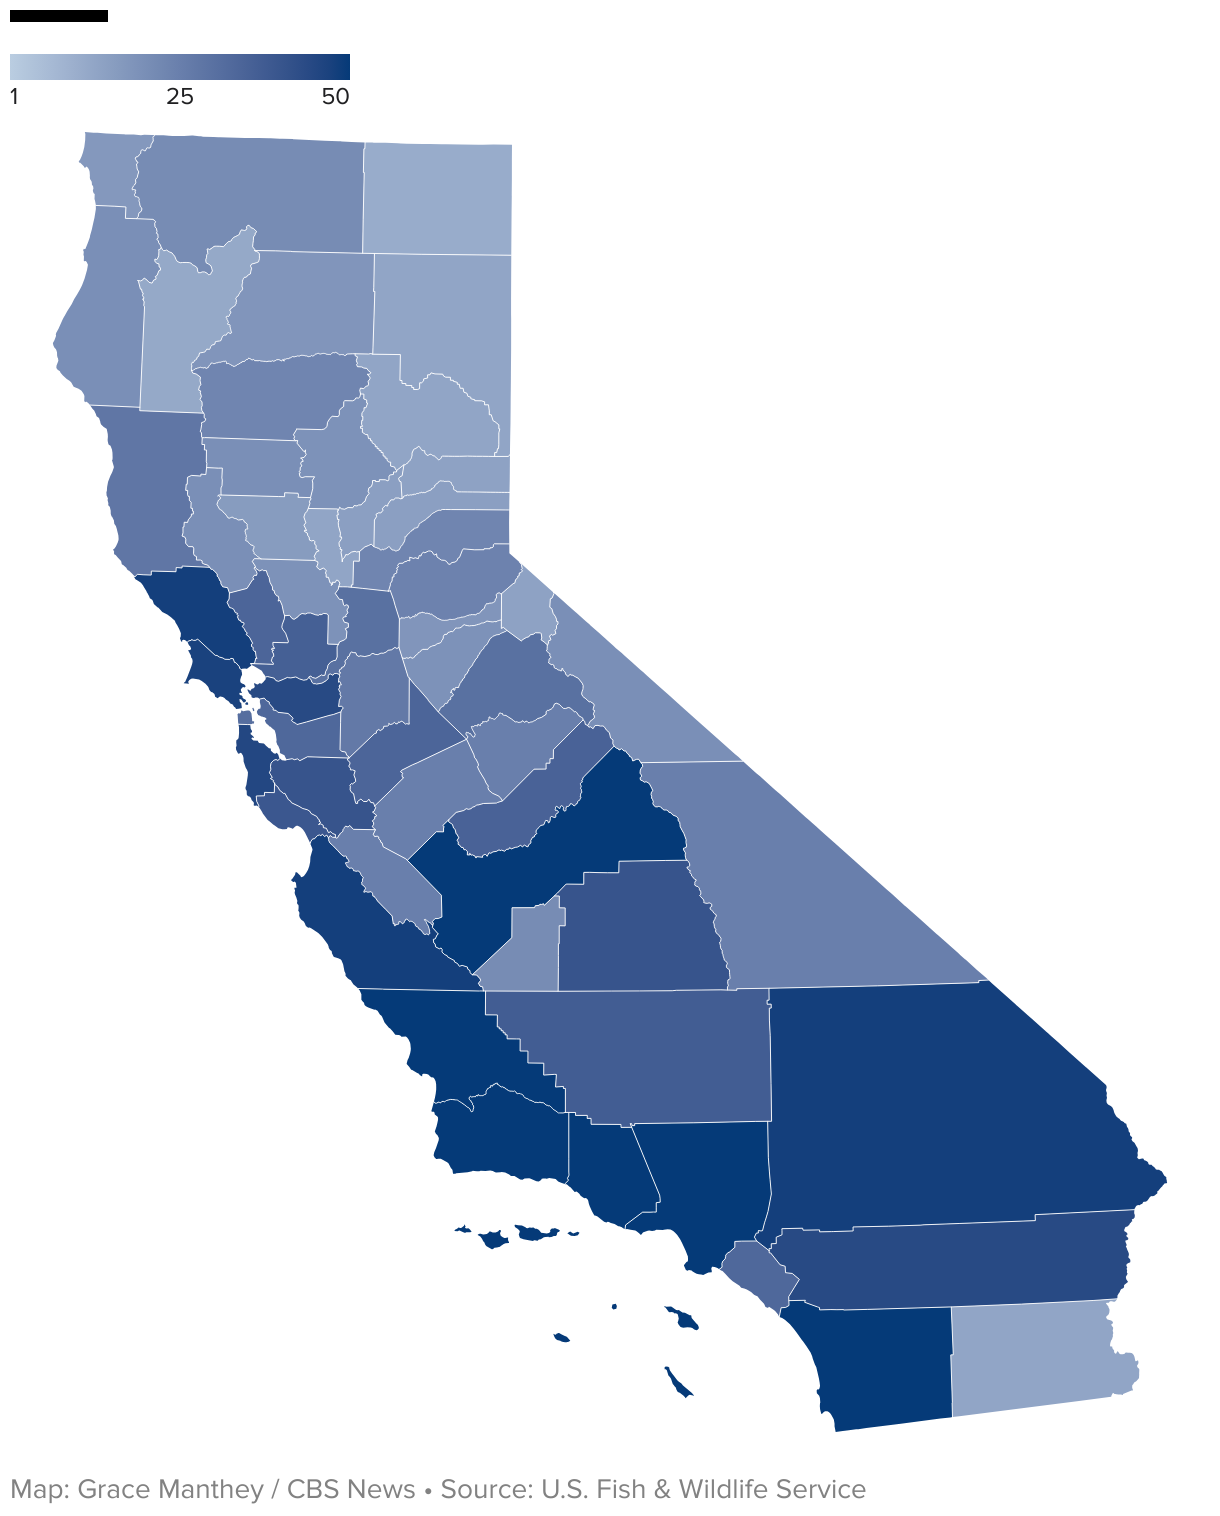 A map showing the number of threatened species by county in California, shaded in blue.  Coastal, central, and southern California have the highest numbers.